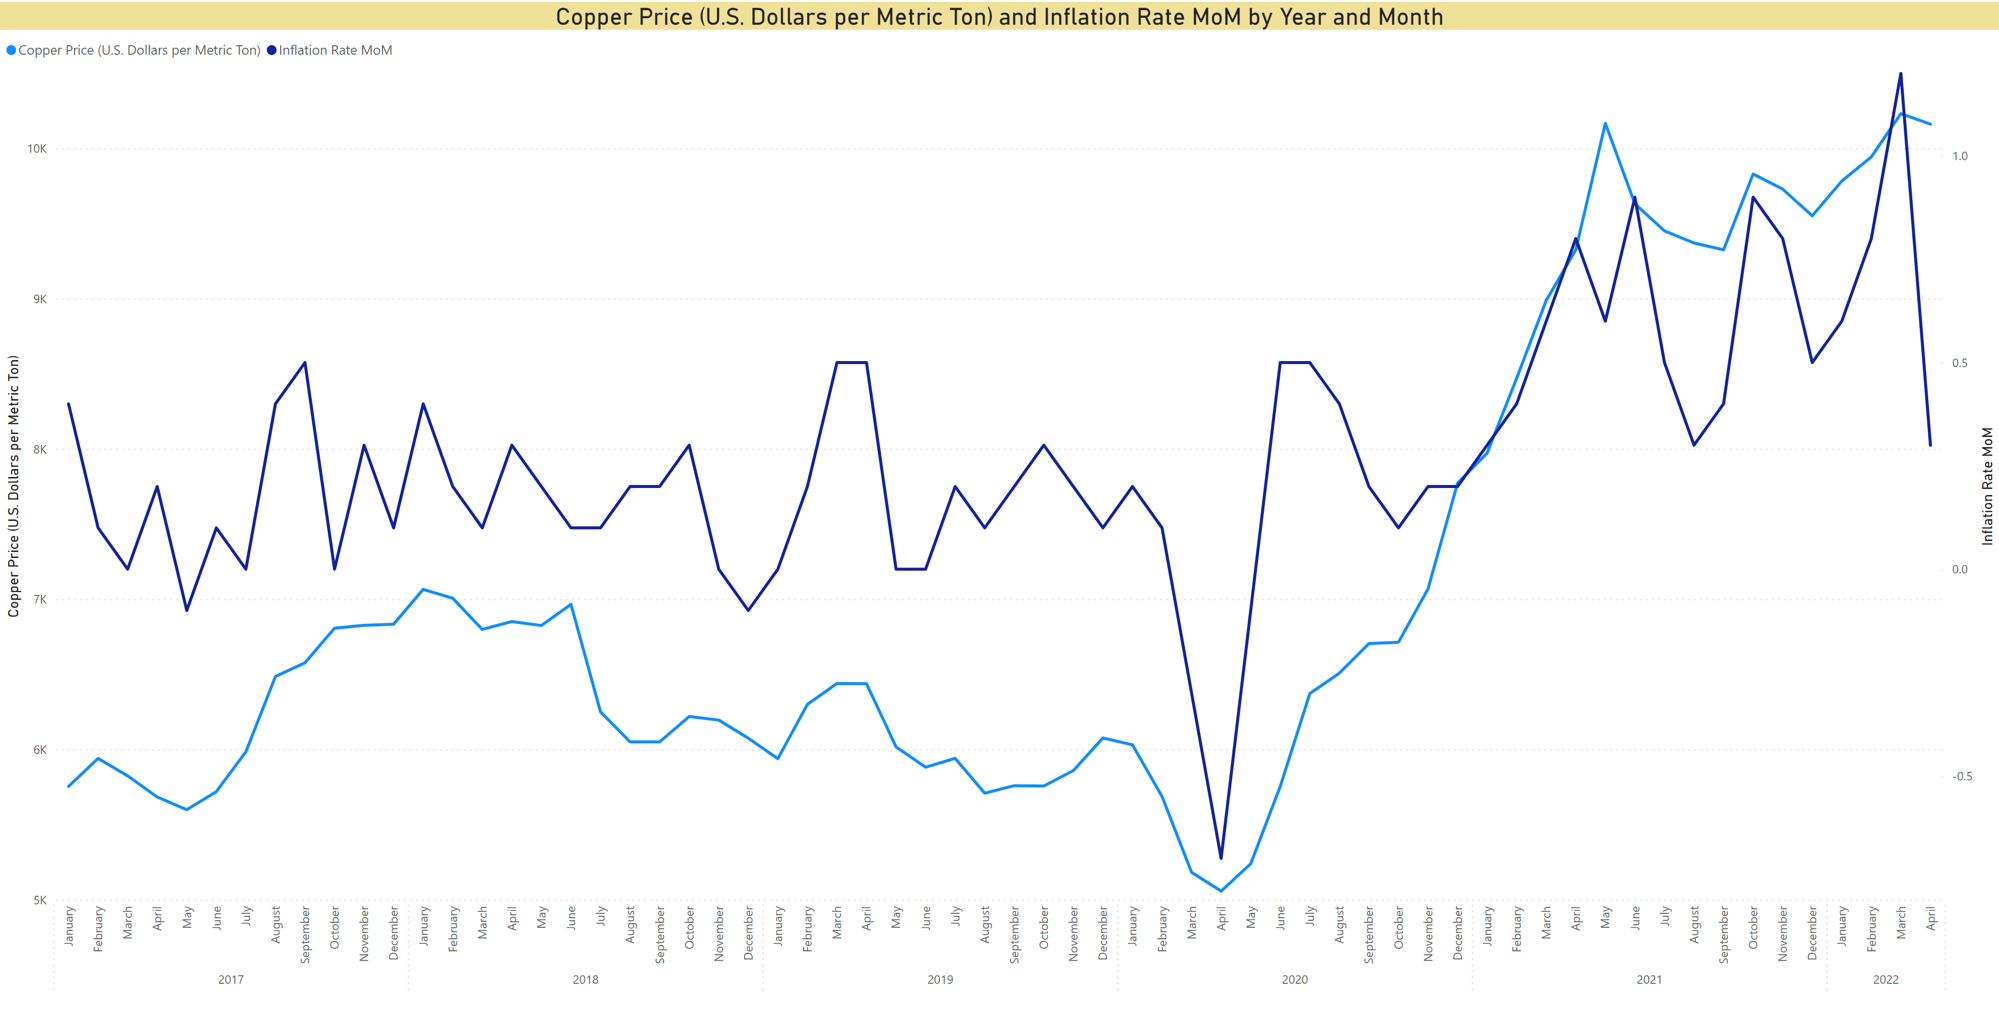 Copper Price and Inflation Rate